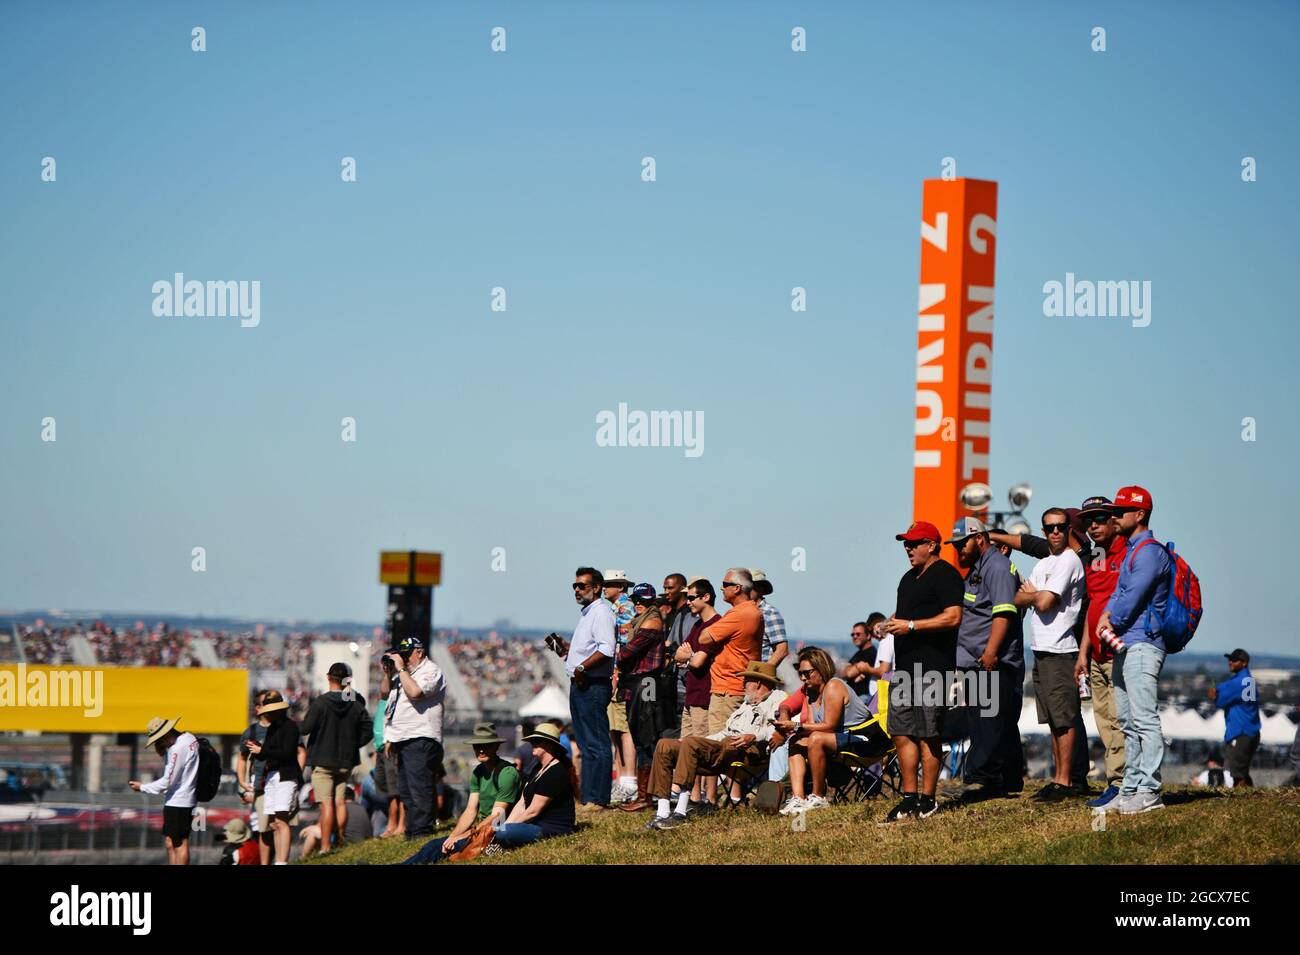 Fans. United States Grand Prix, Friday 21st October 2016. Circuit of the Americas, Austin, Texas, USA. Stock Photo